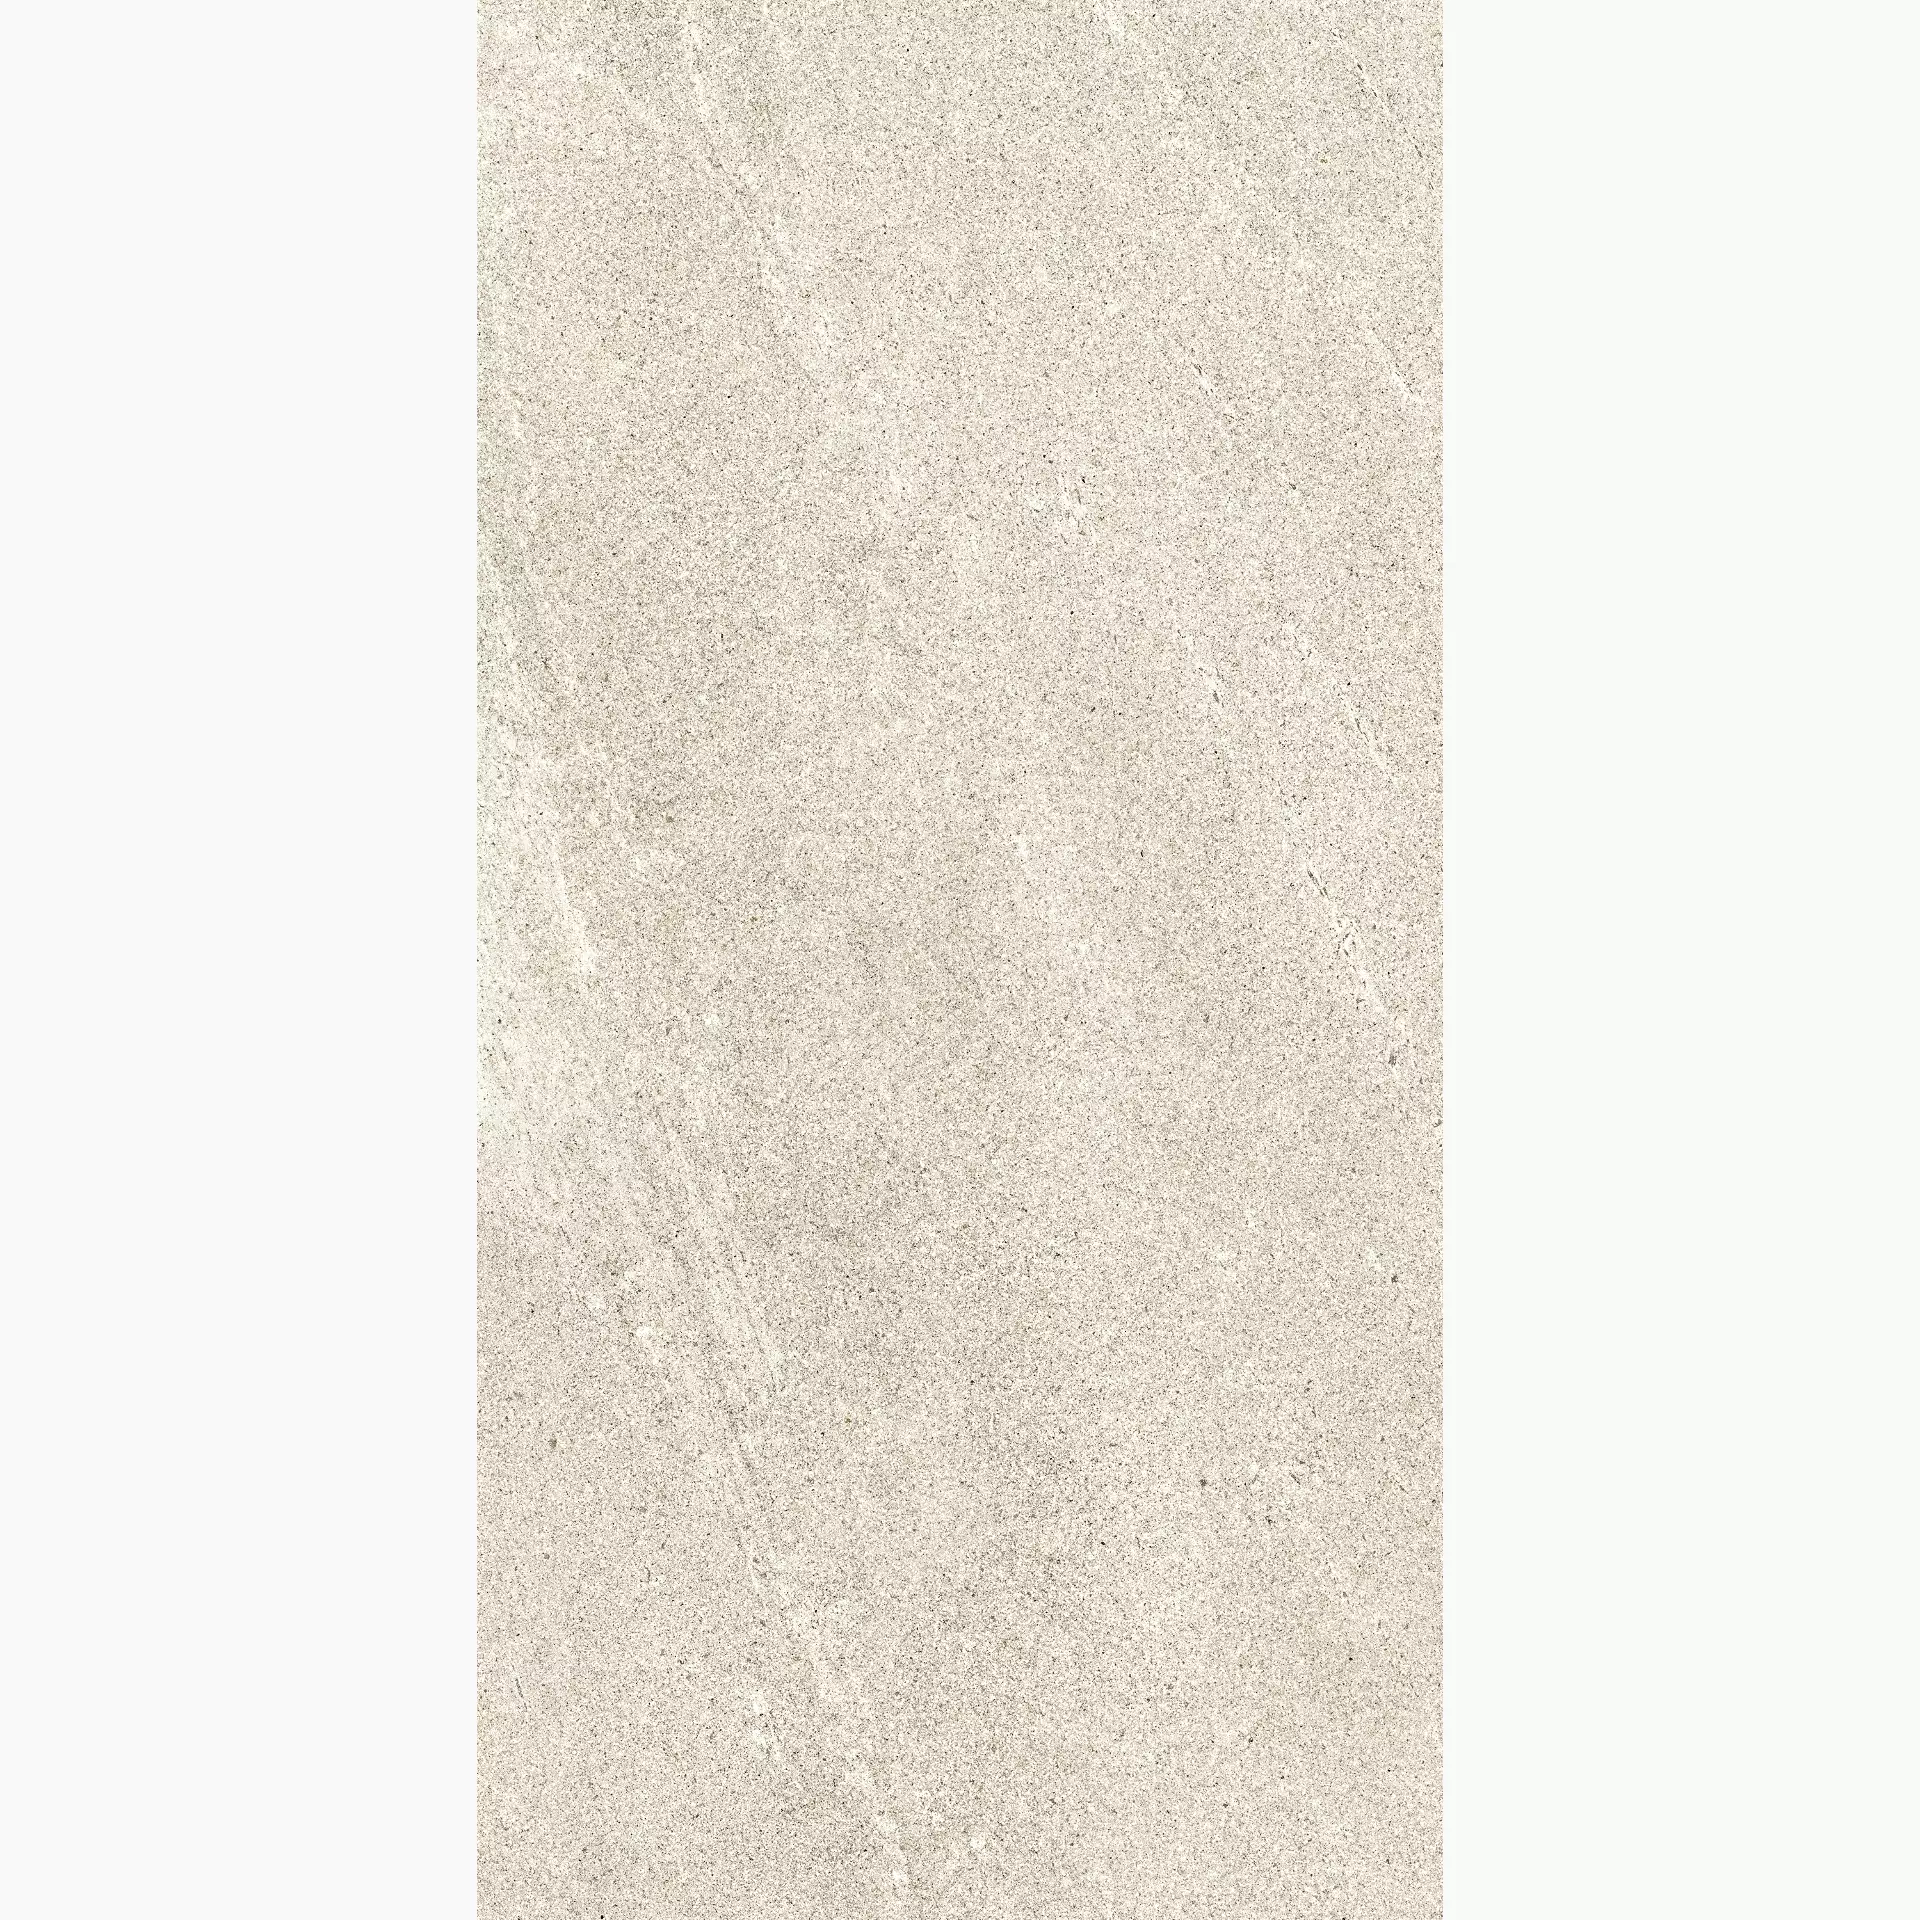 Cottodeste Blend Stone Clear Hammered Protect EGXBS50 60x120cm rectified 20mm